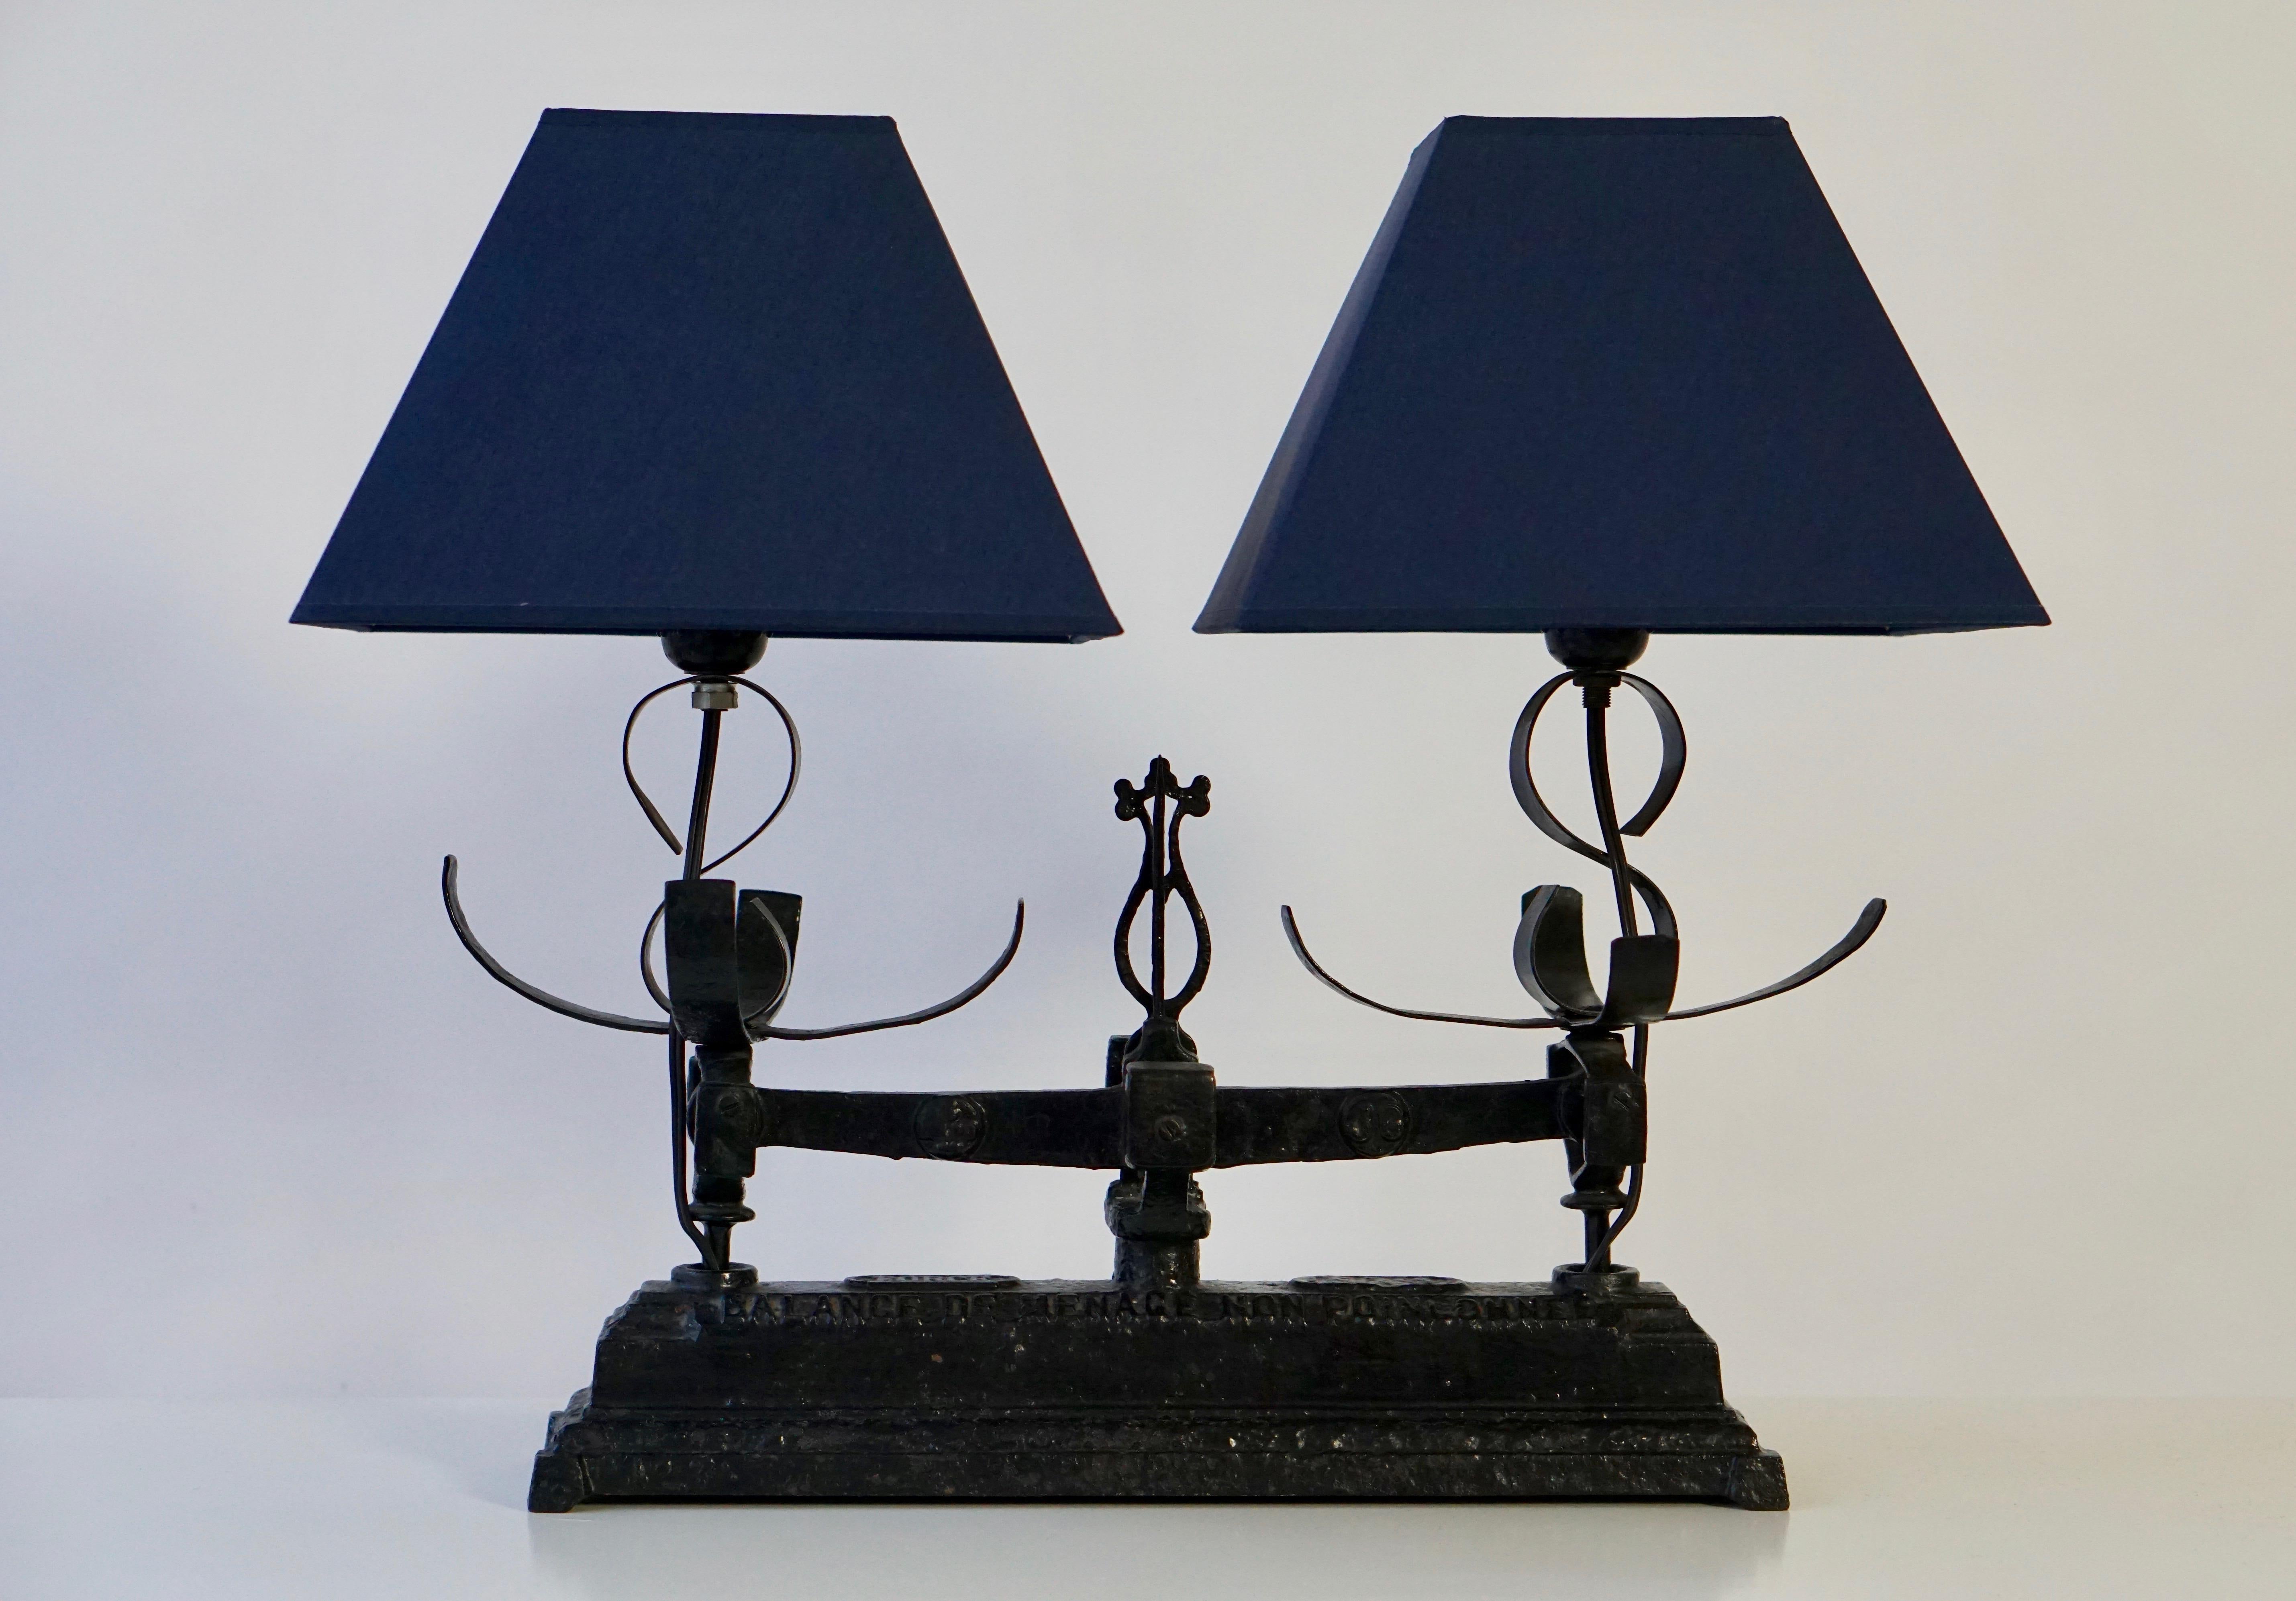 Table lamp made of an old wrought iron balance, scale.
Measure: Width 48 cm.
Depth 20 cm.
Height with socket 34 cm.
Weight 5 kg.
Lamp shades are not included in the price.